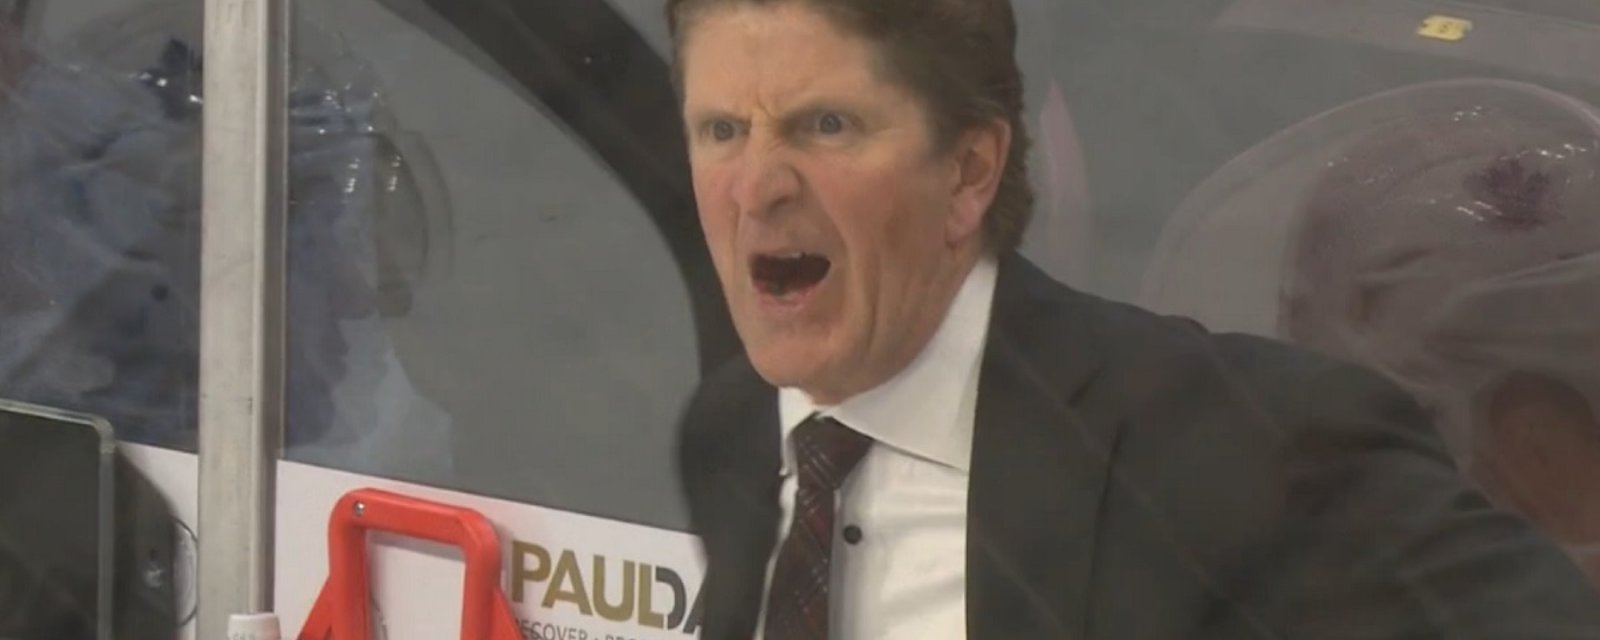 Mike Babcock goes off on linesman after he cost the Leafs a goal. 